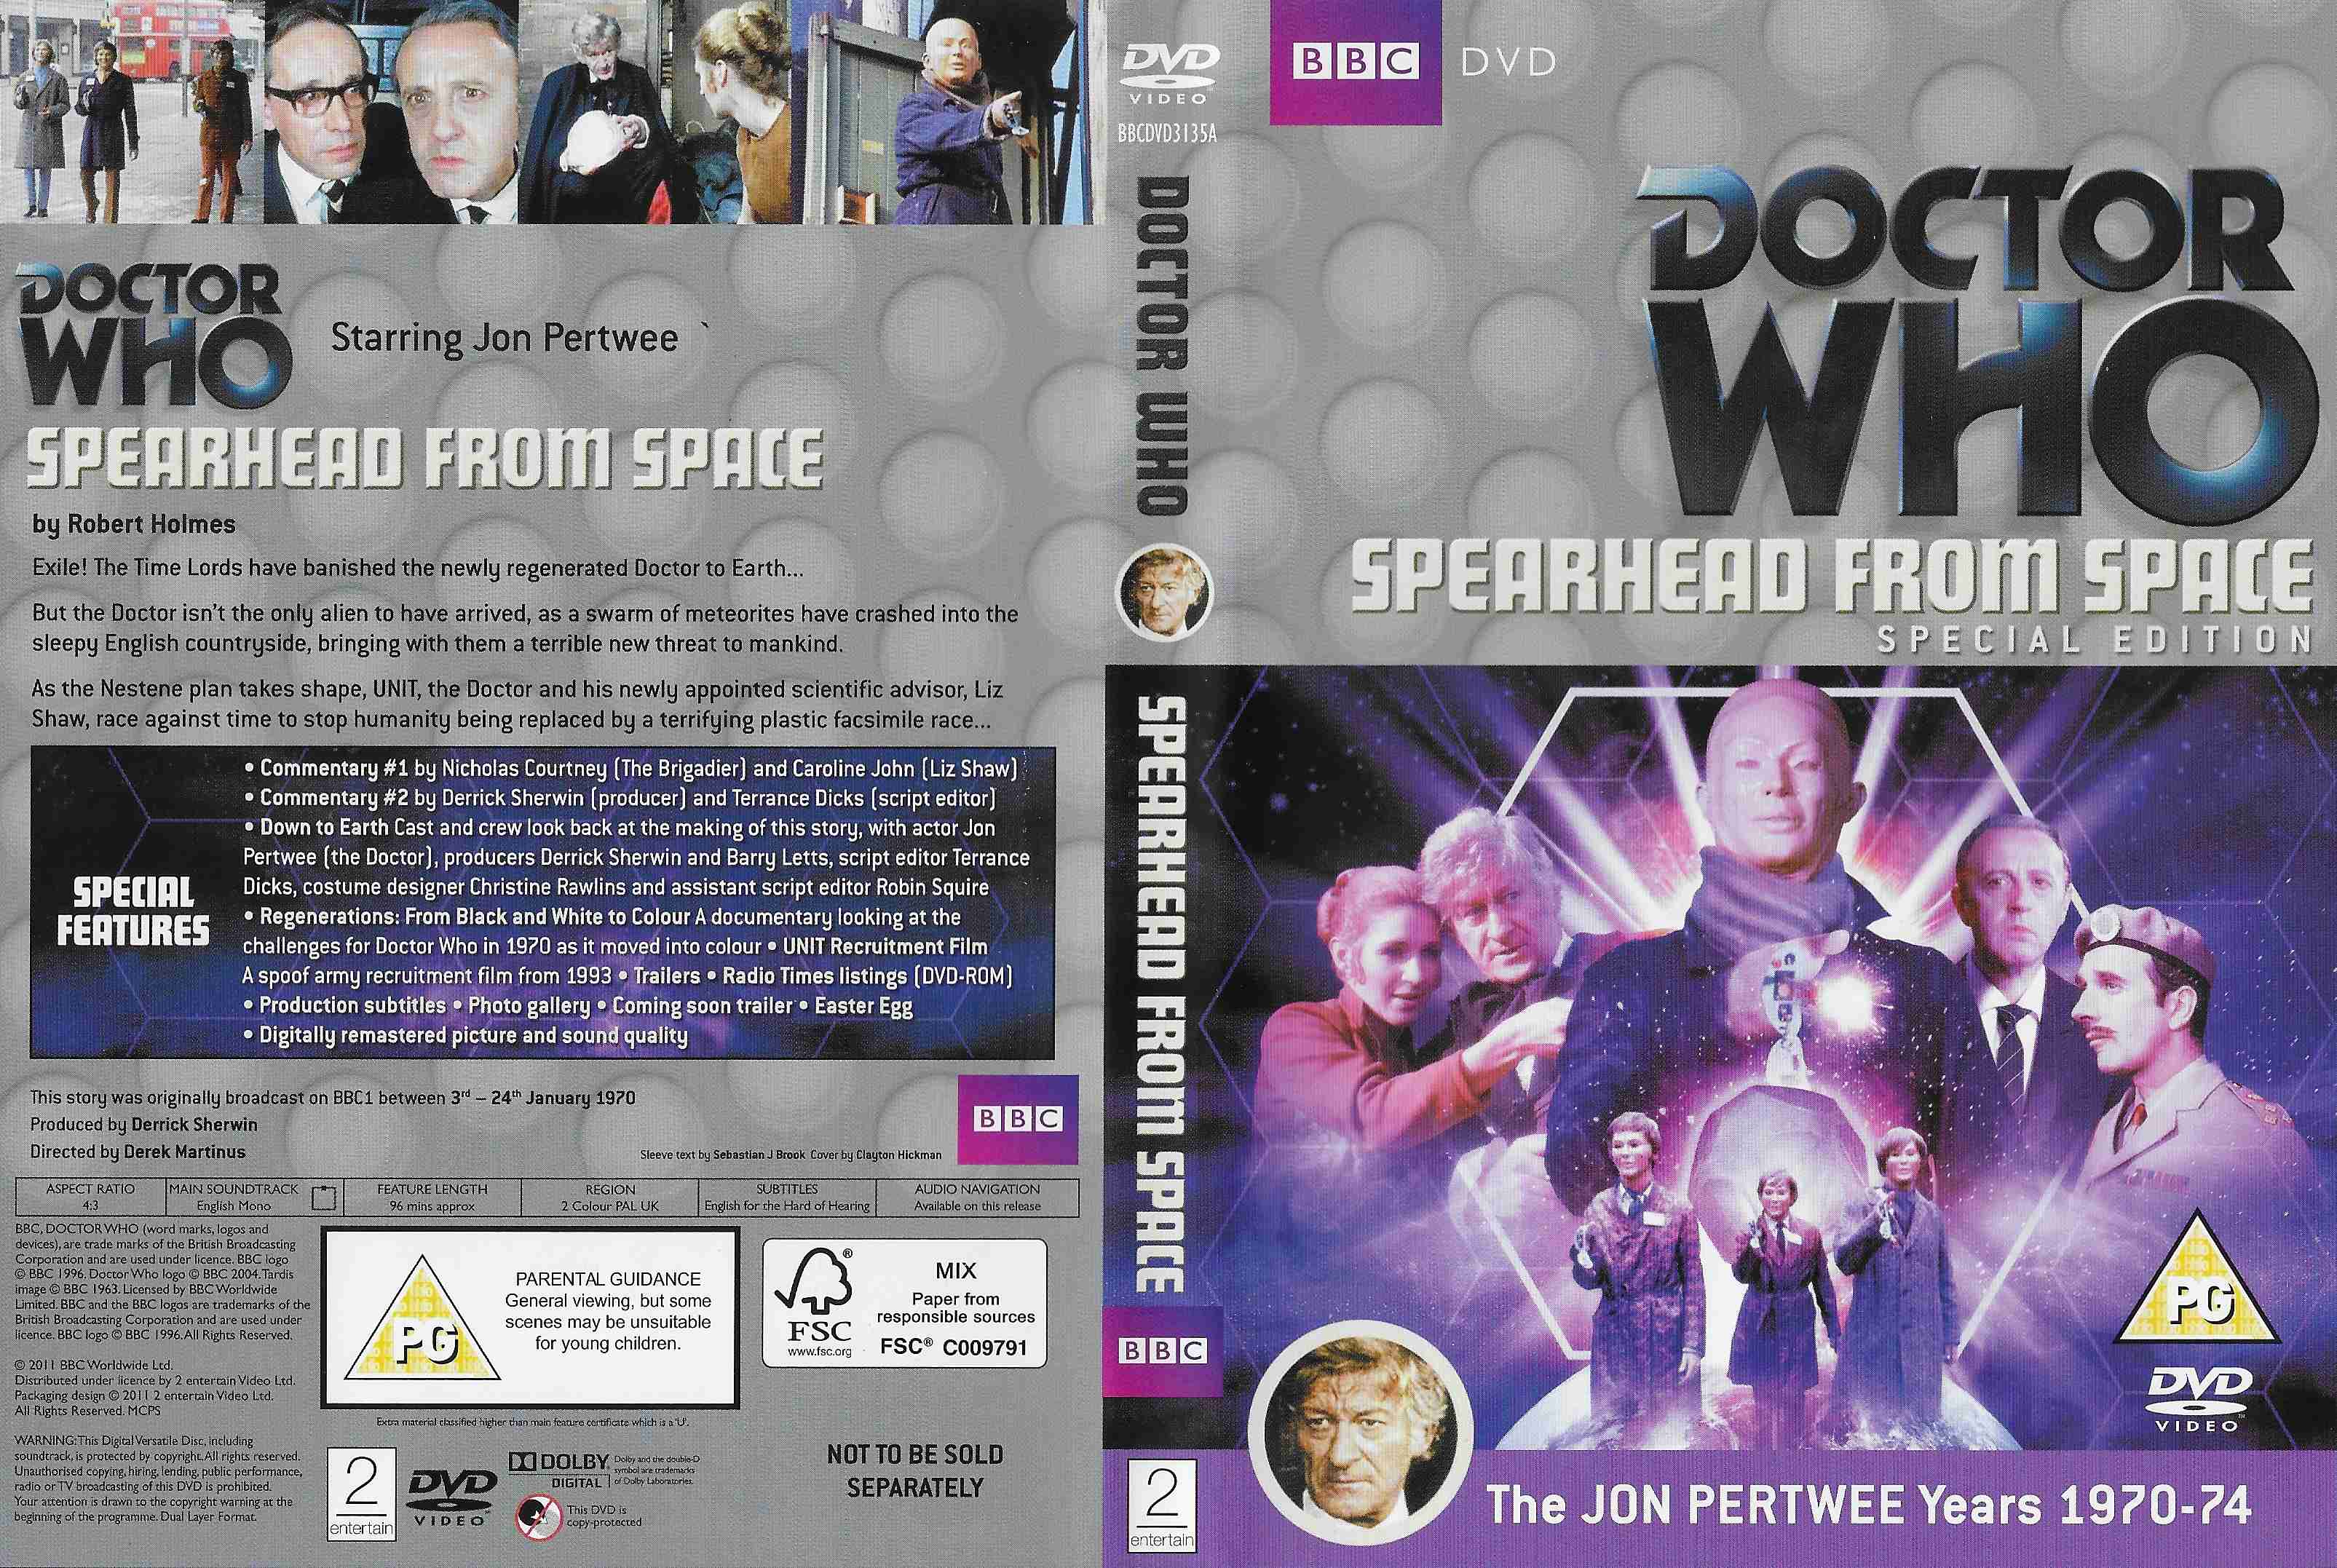 Picture of BBCDVD 3135A Doctor Who - Spearhead from space by artist Robert Holmes from the BBC records and Tapes library